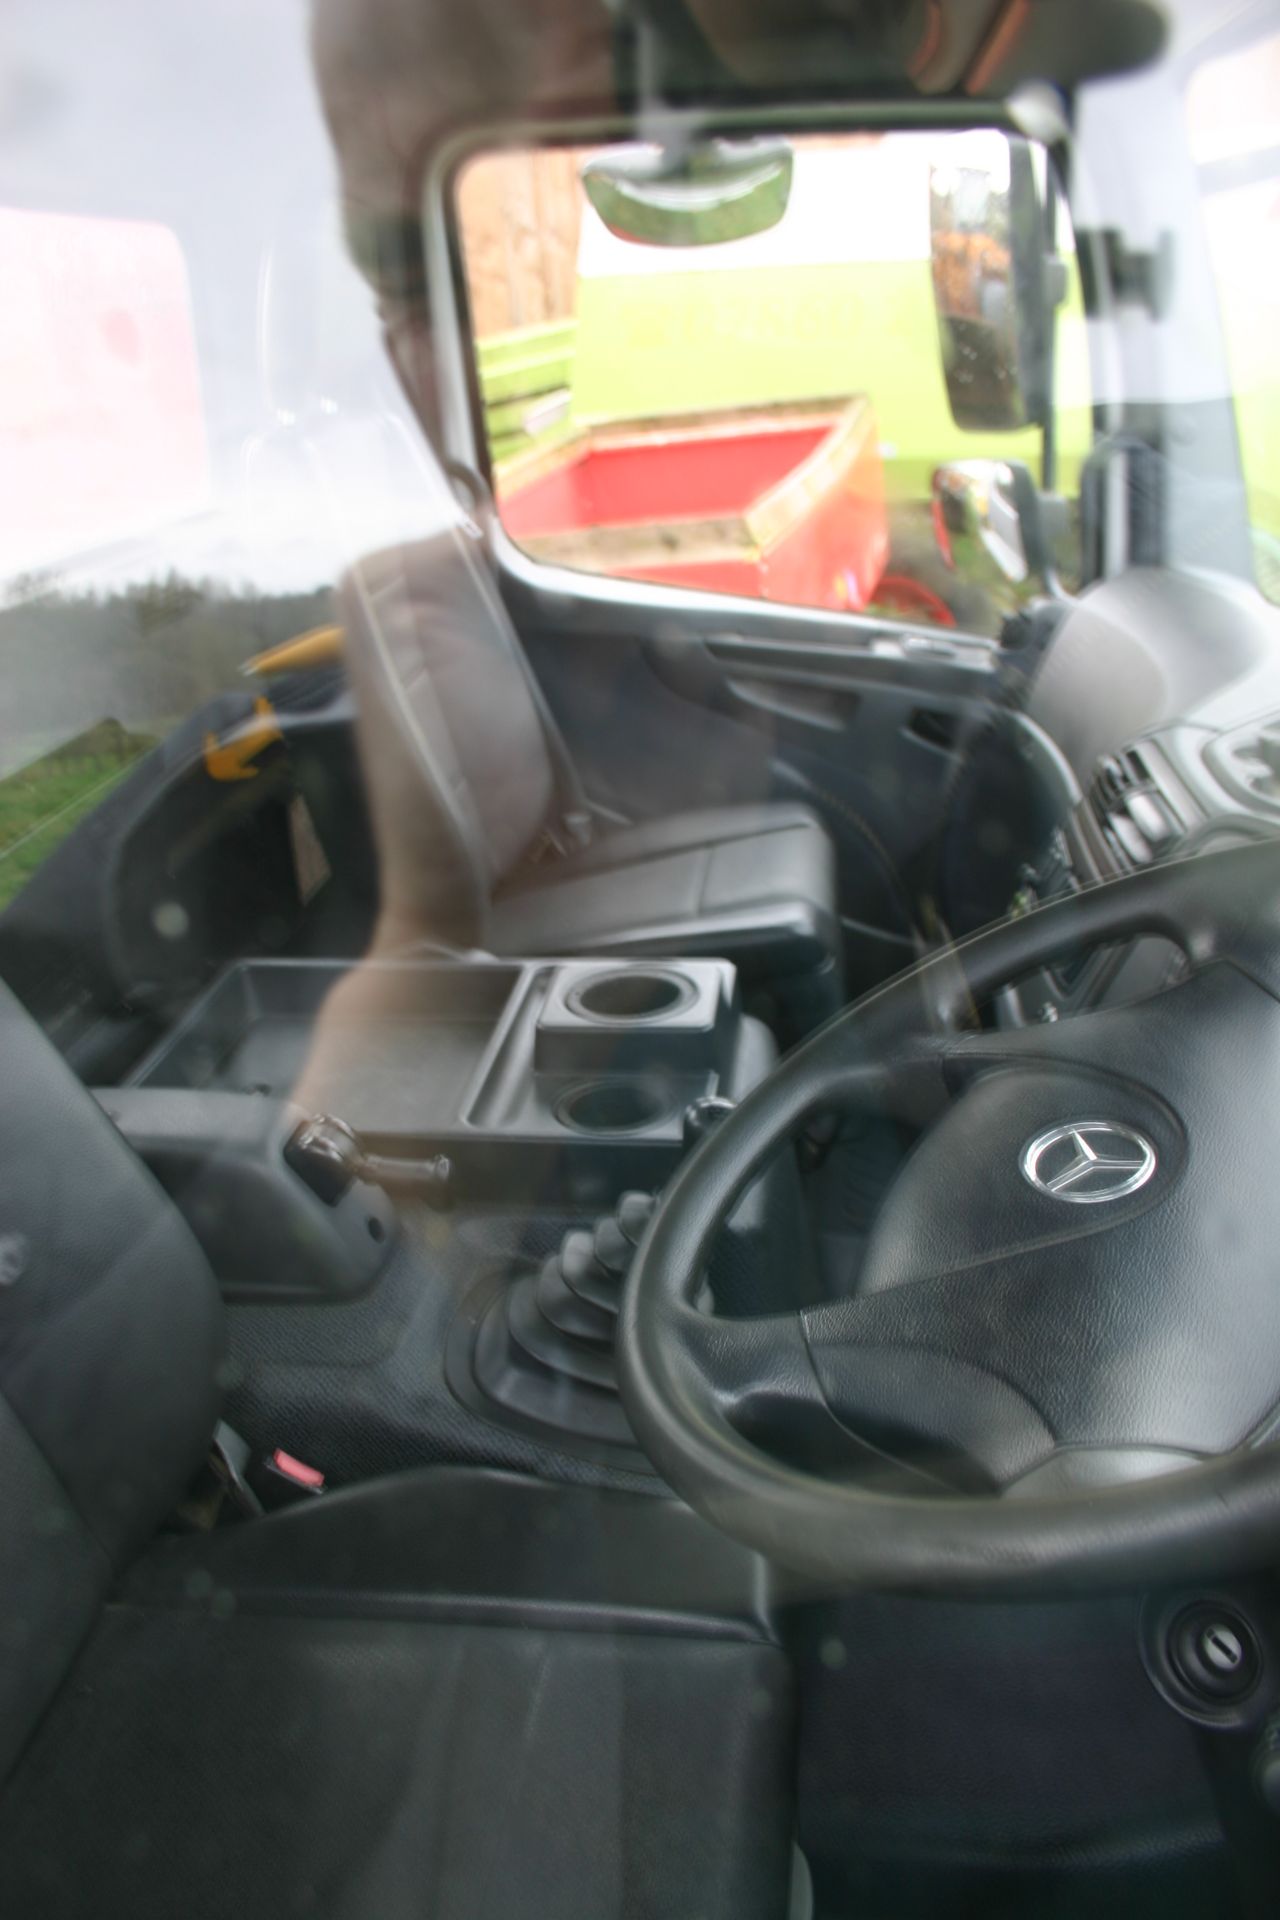 2011/60 REG MERCEDES ATEGO 1018 BLUETEC S 4.3 DIESEL 4WD TOWER WAGON, SHOWING 0 FORMER KEEPERS - Image 8 of 12